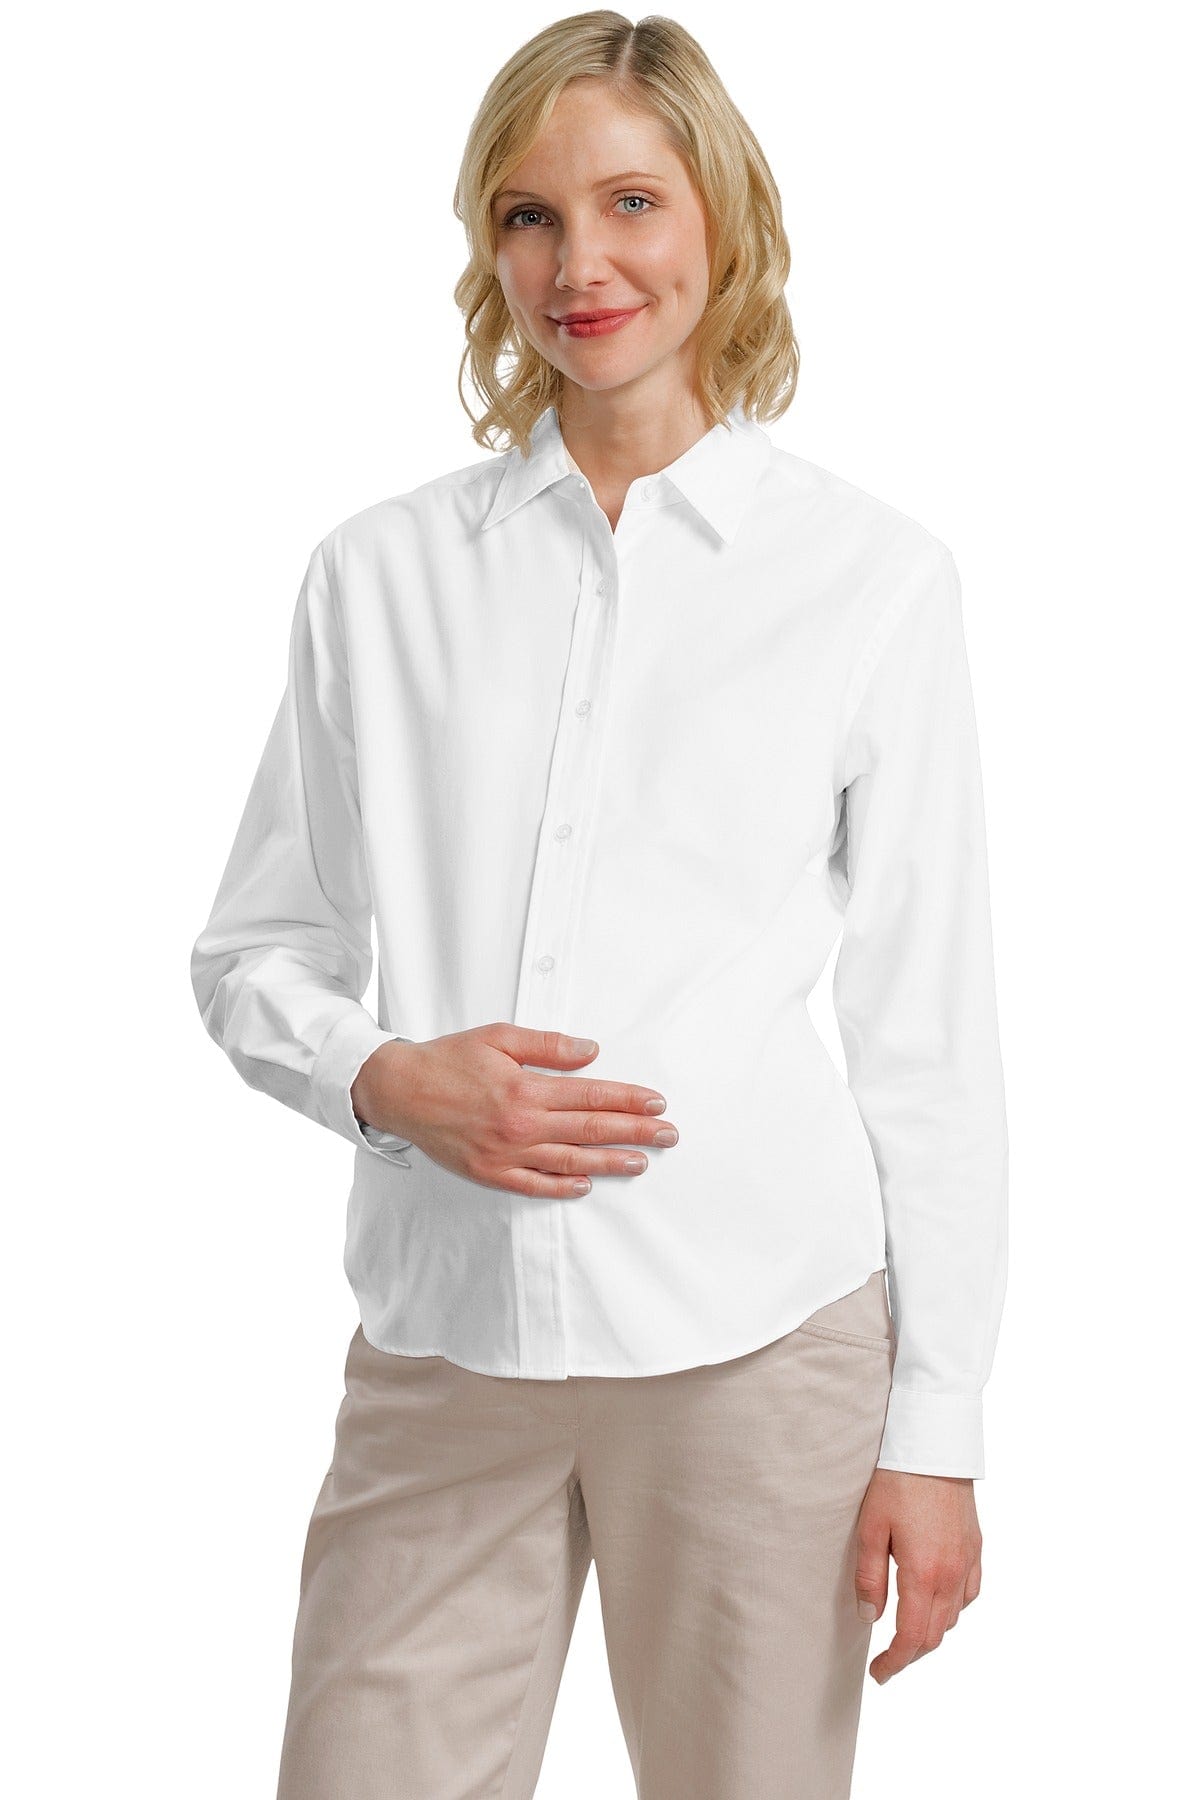 DISCONTINUED  Port Authority ®  Maternity Long Sleeve Easy Care Shirt.  L608M